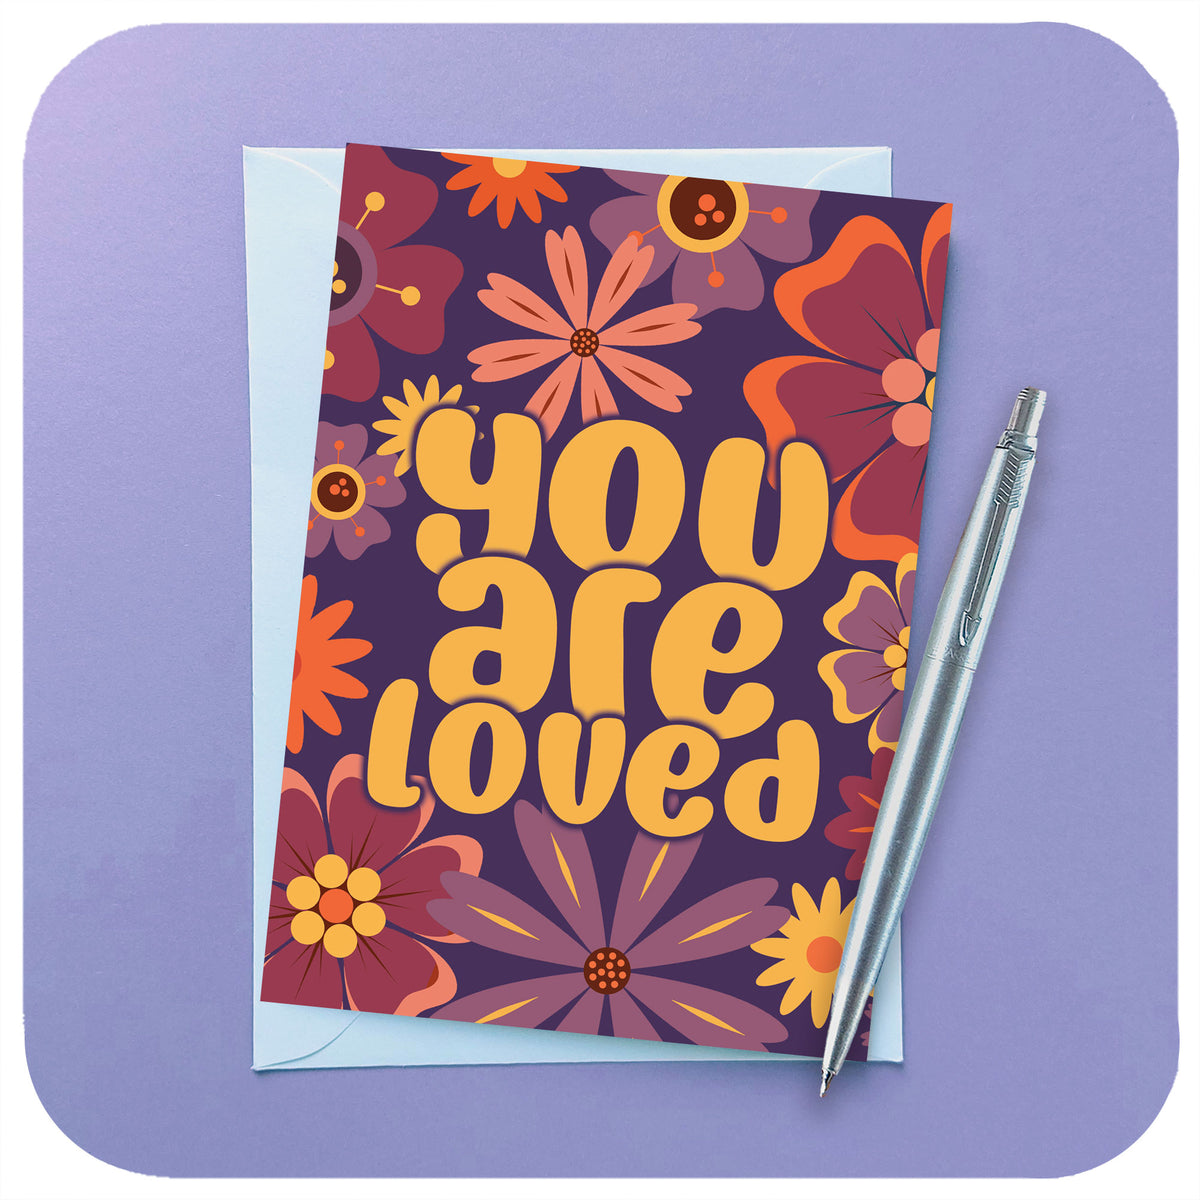 An A6 greetings card featuring 70s / 60s style flowers in pinks, purples & oranges and the words "You Are Loved" sits on a white envelope beside a chrome pen on a lilac background | The Inkabilly Emporium